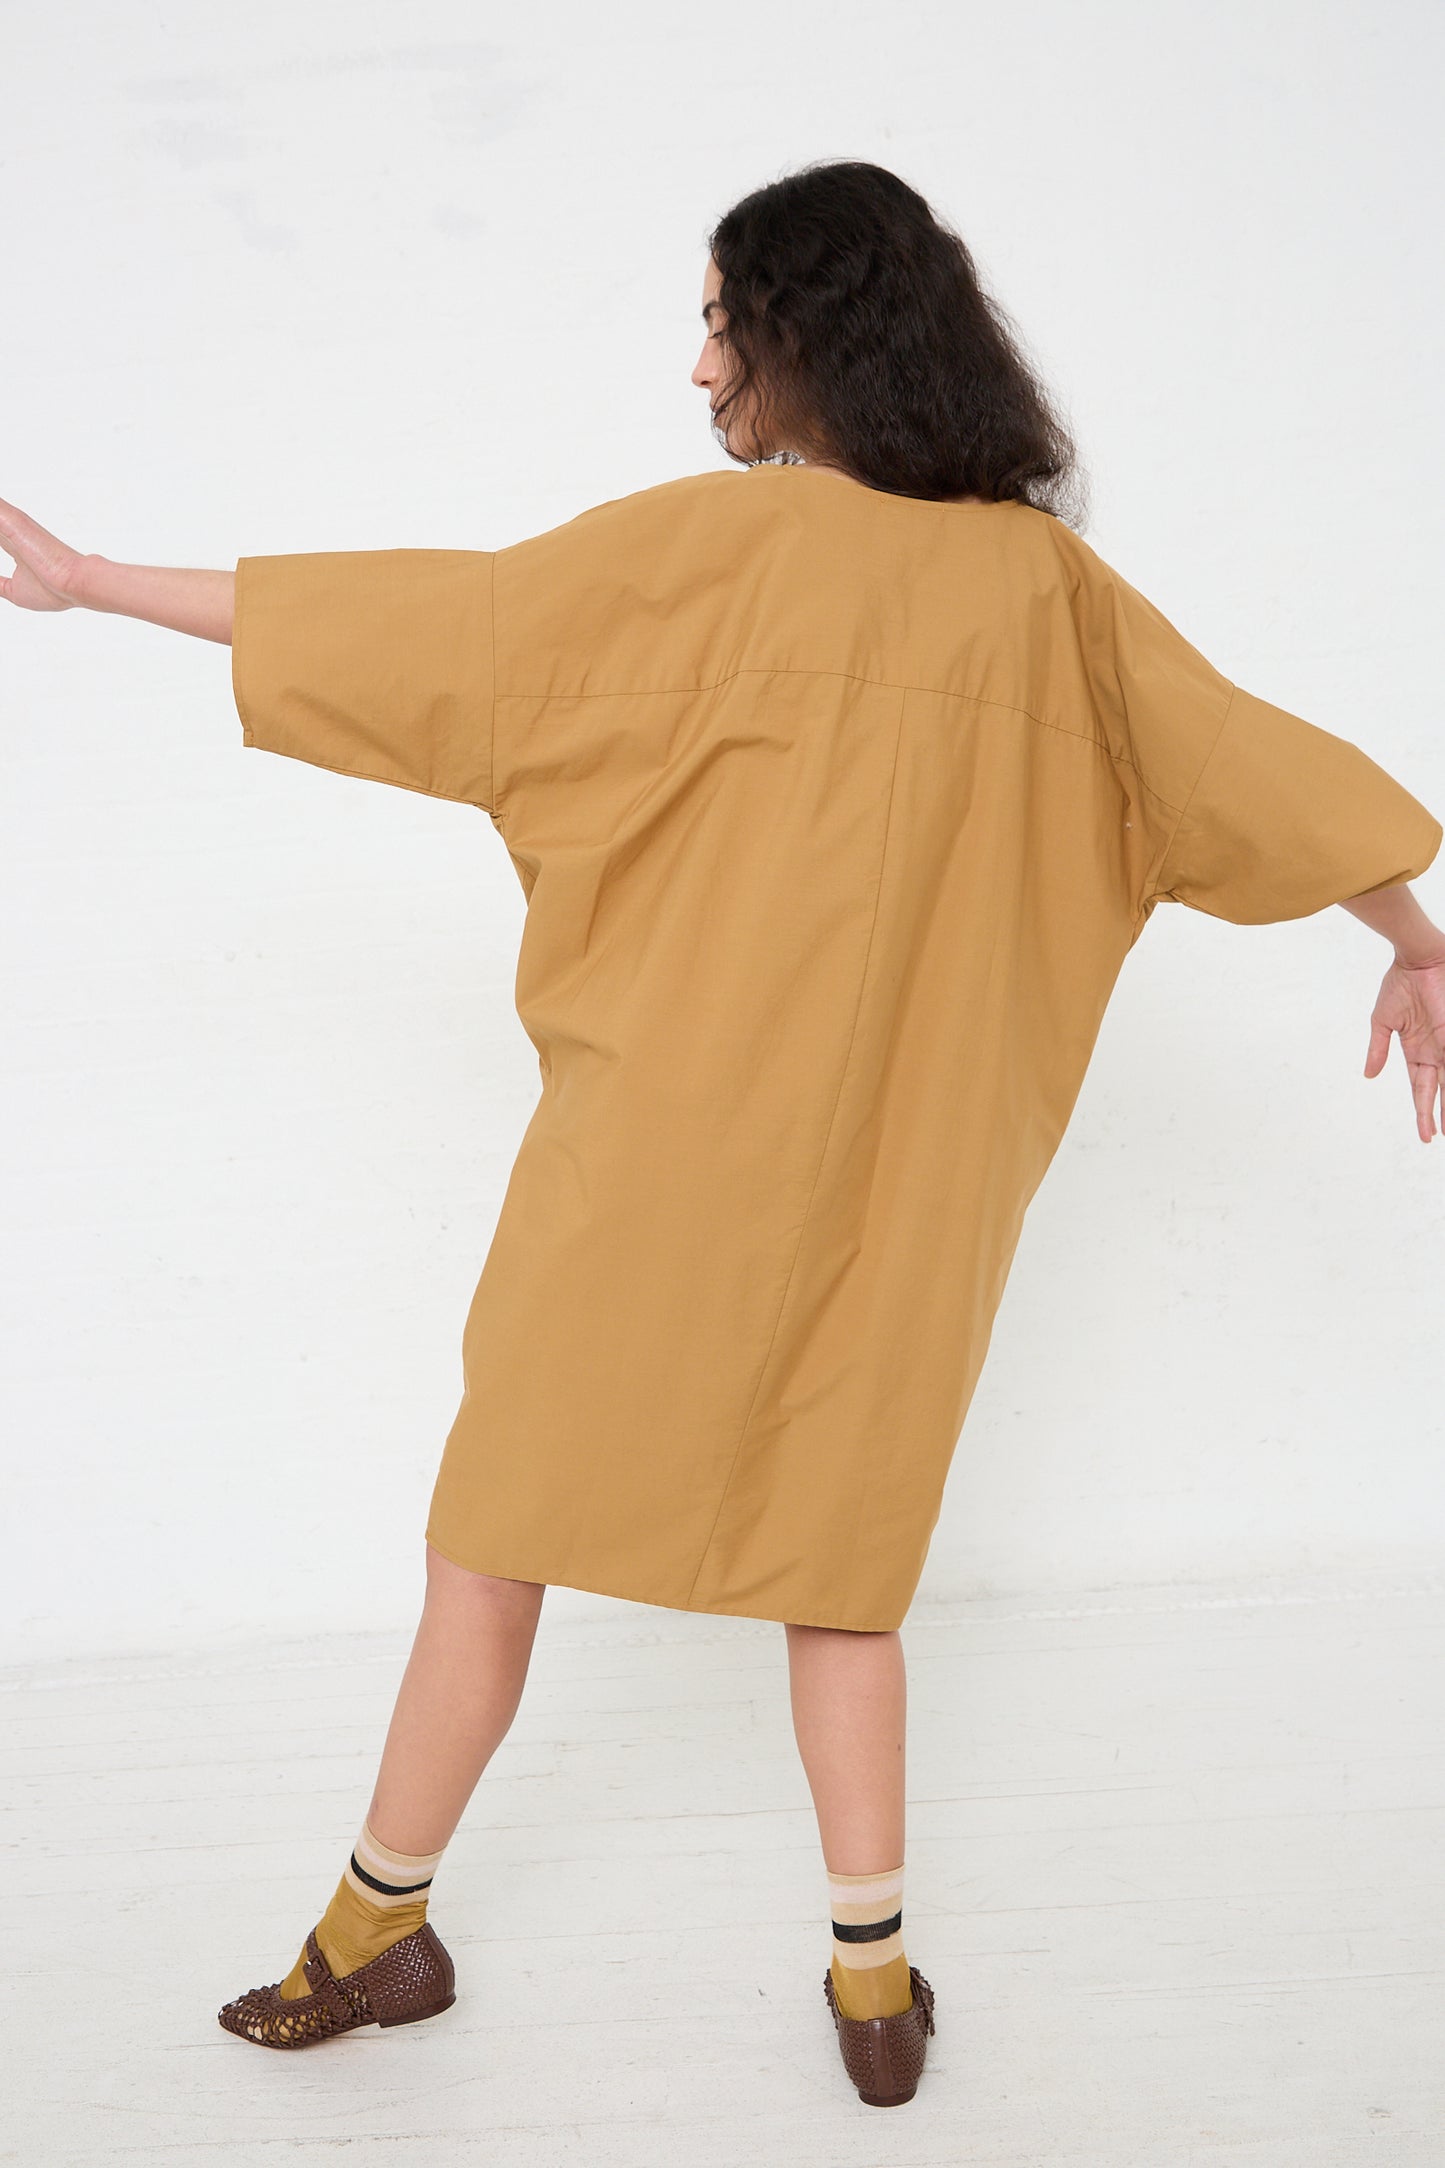 Woman in a Organic Cotton Bow Dress in Camel by Black Crane posing with arms outstretched.